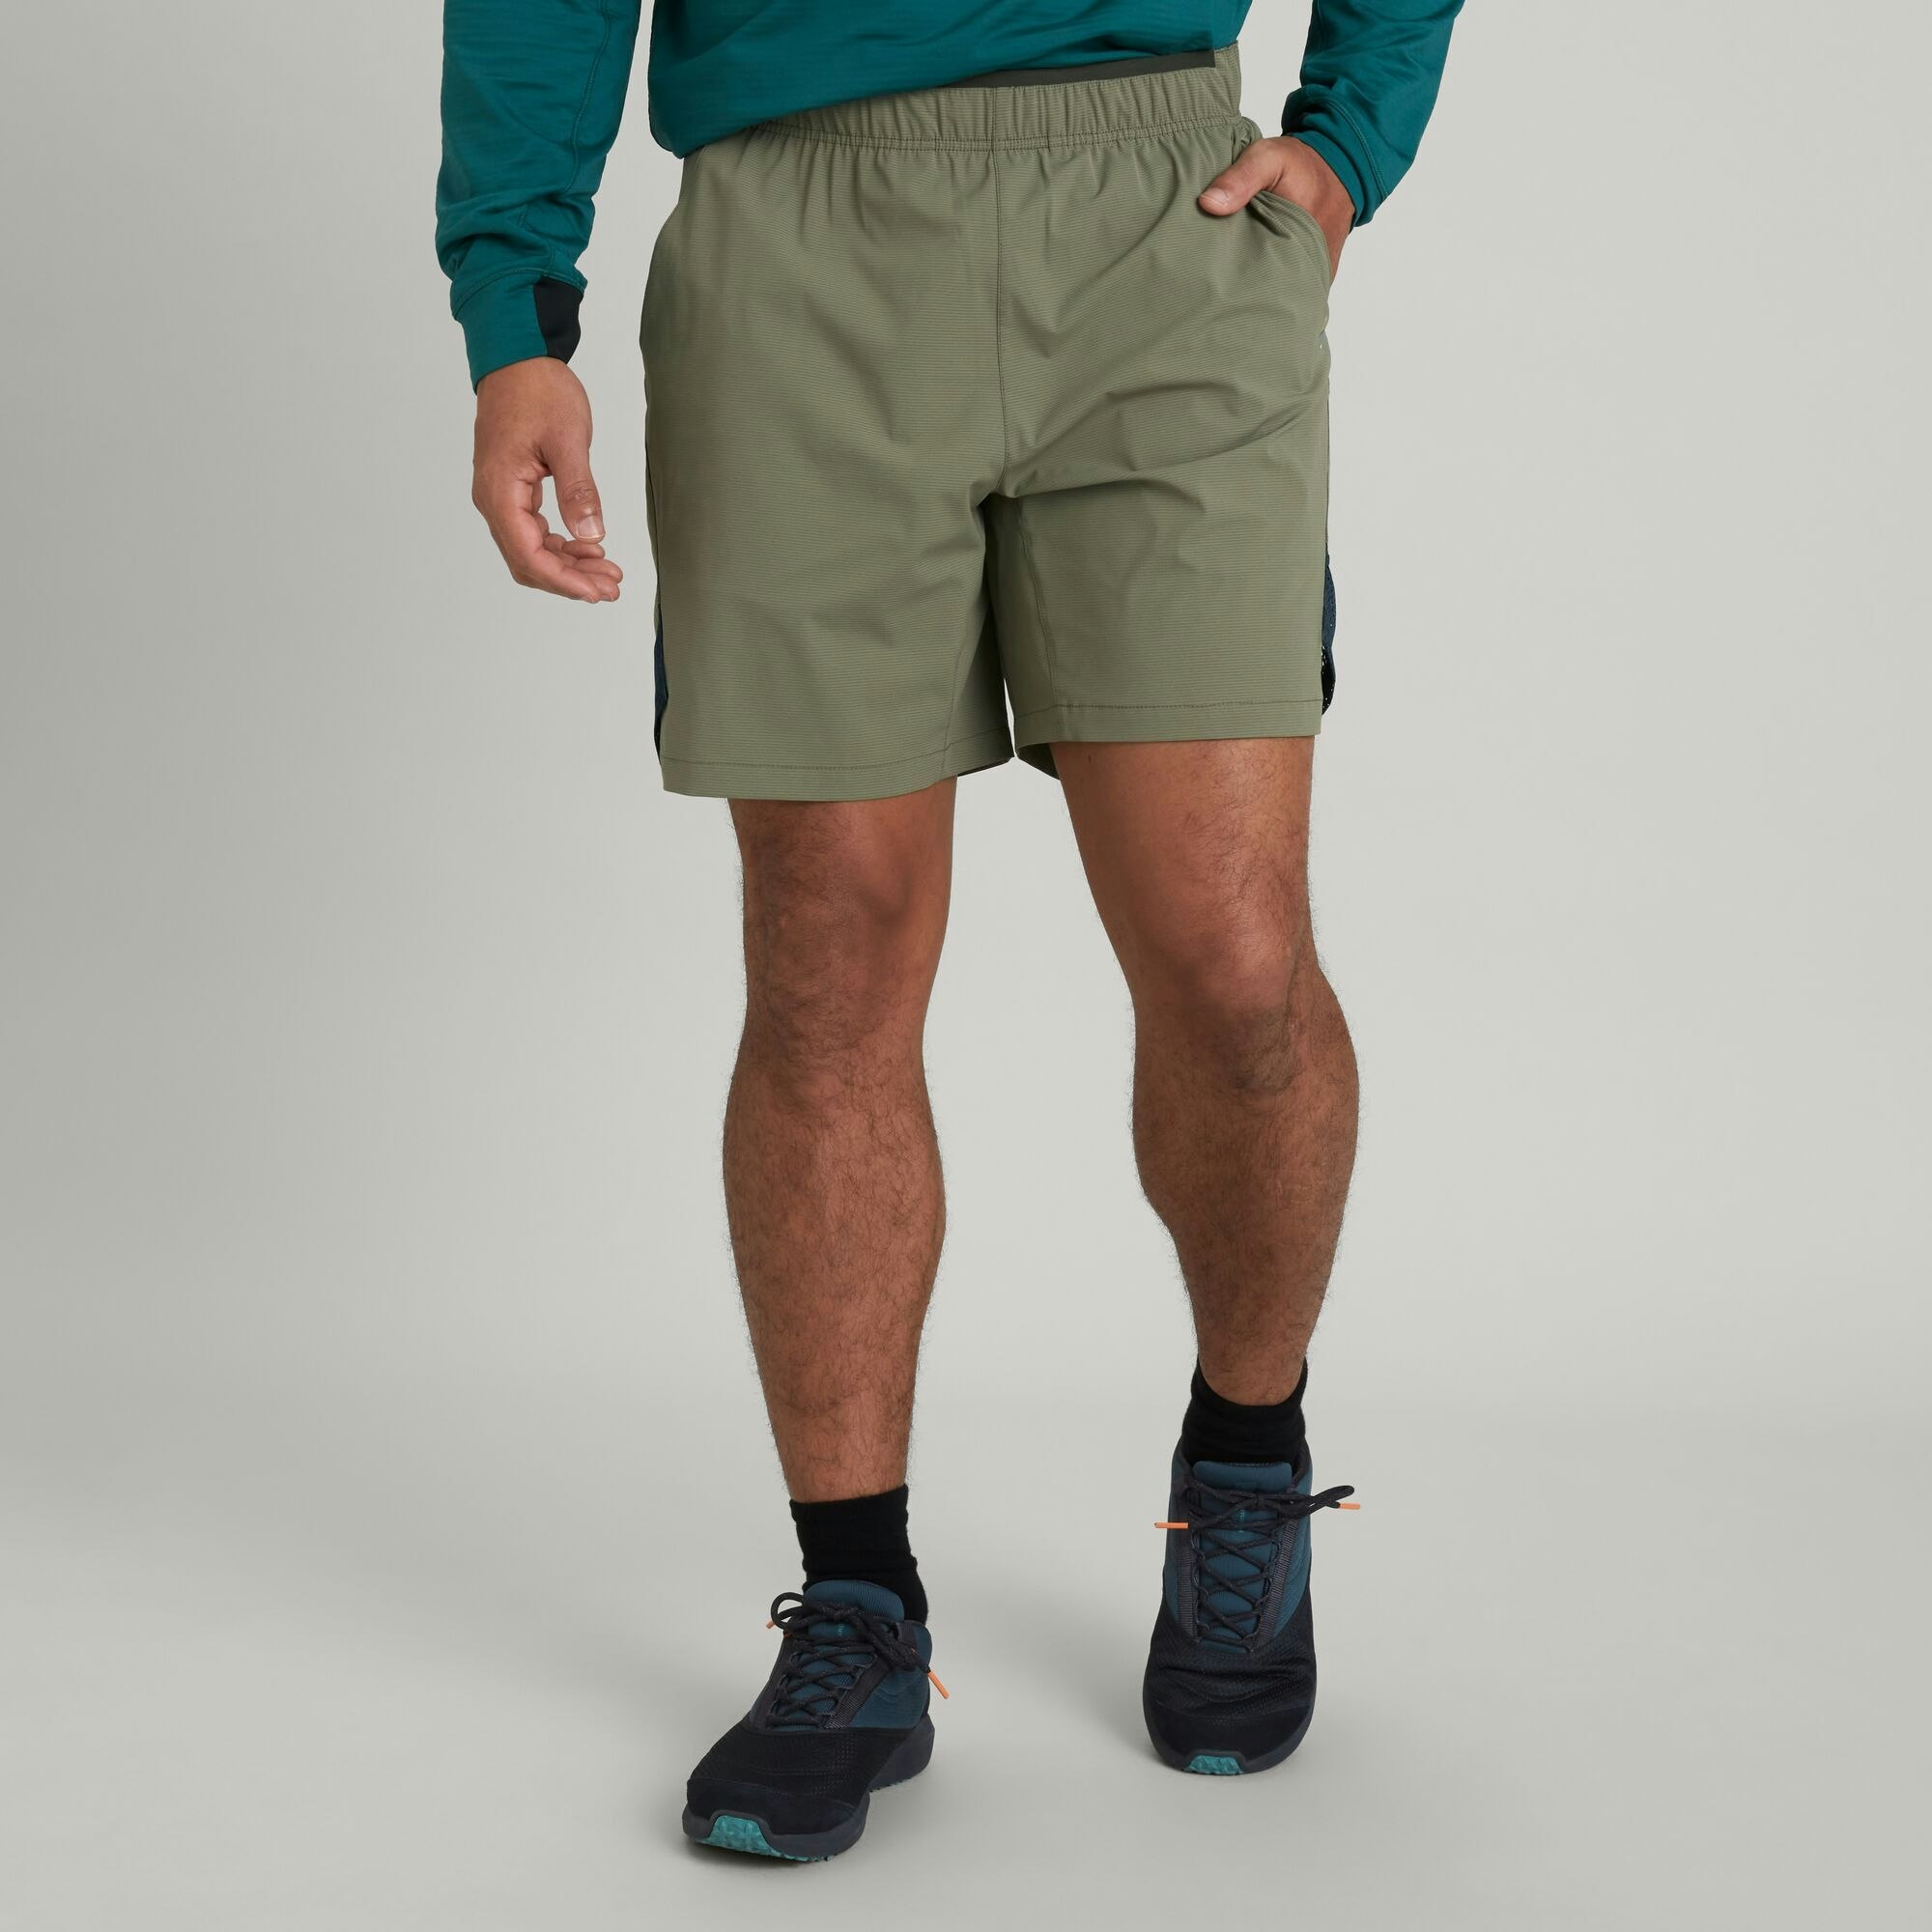 Clearance: WELL.DER.NESS™ Energy Men's 5 Inch Shorts